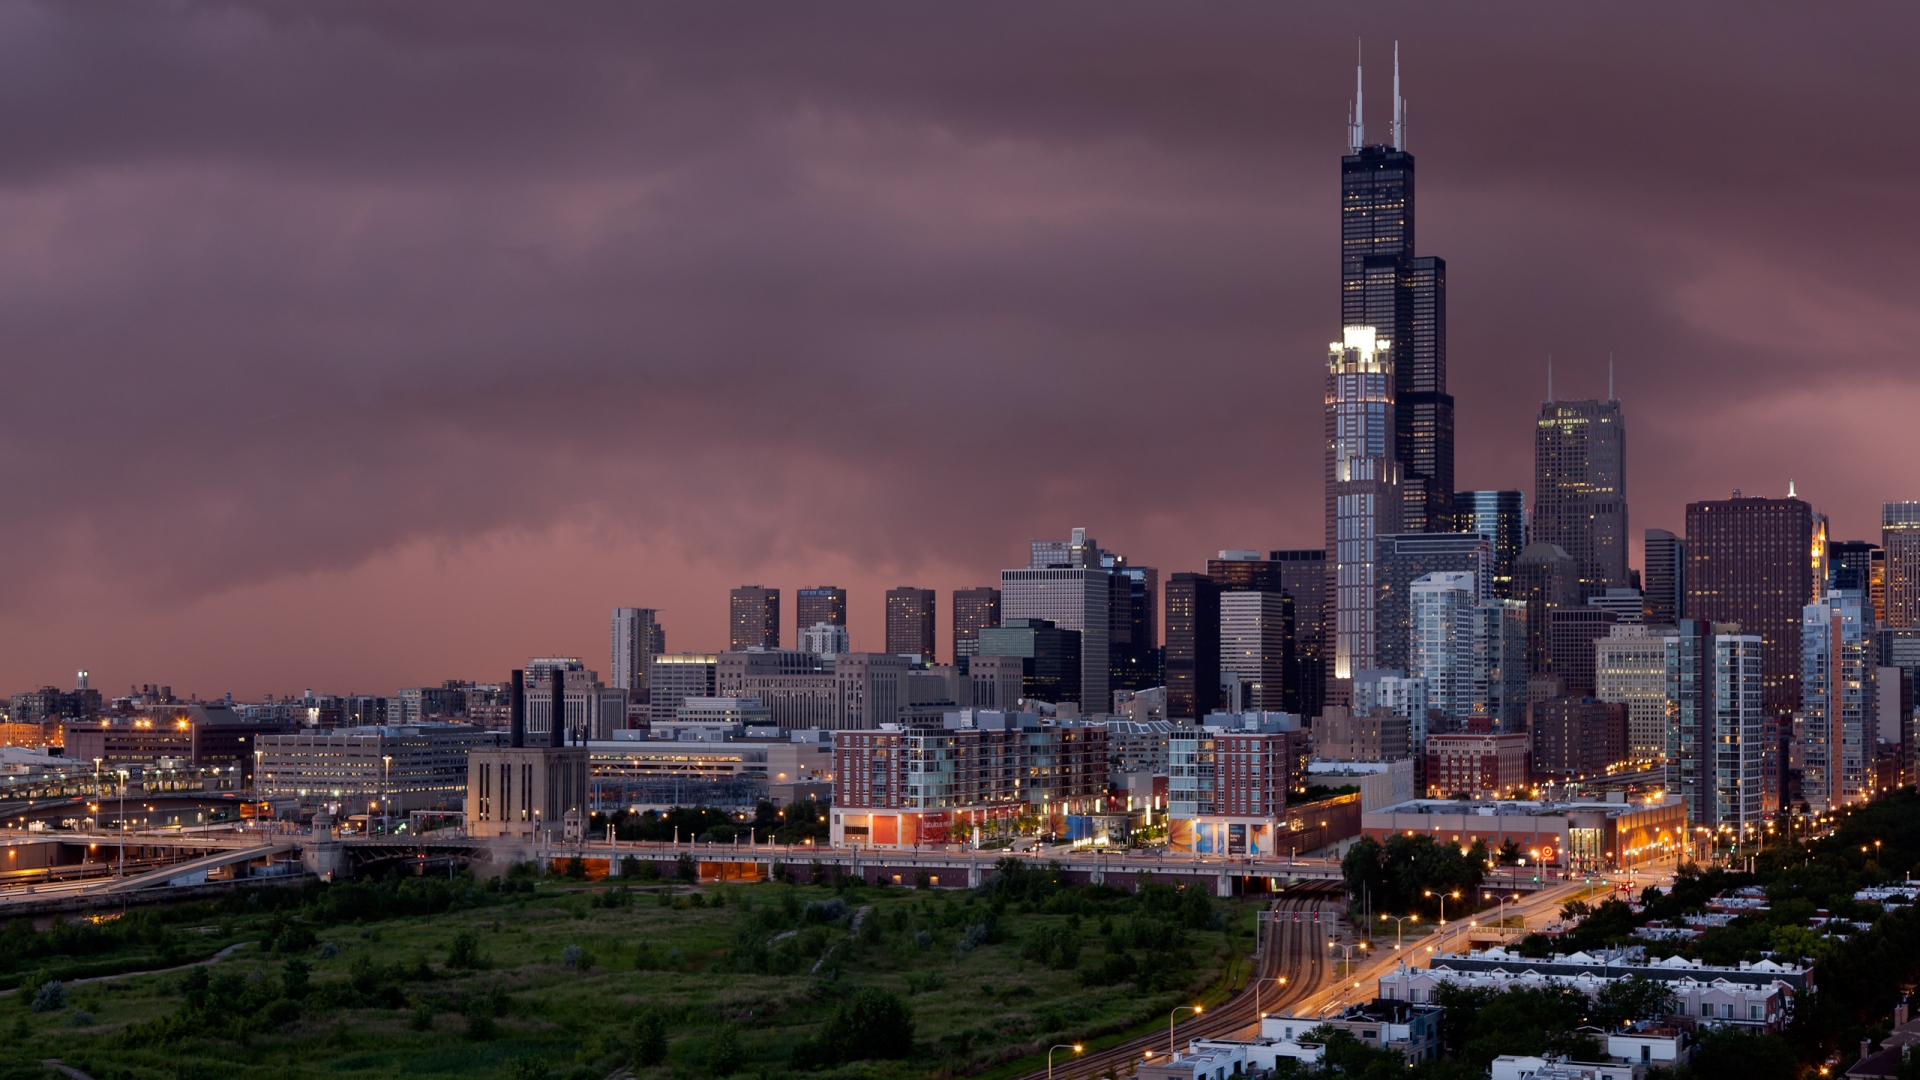 Sunset and Storm in Chicago for 1920 x 1080 HDTV 1080p resolution